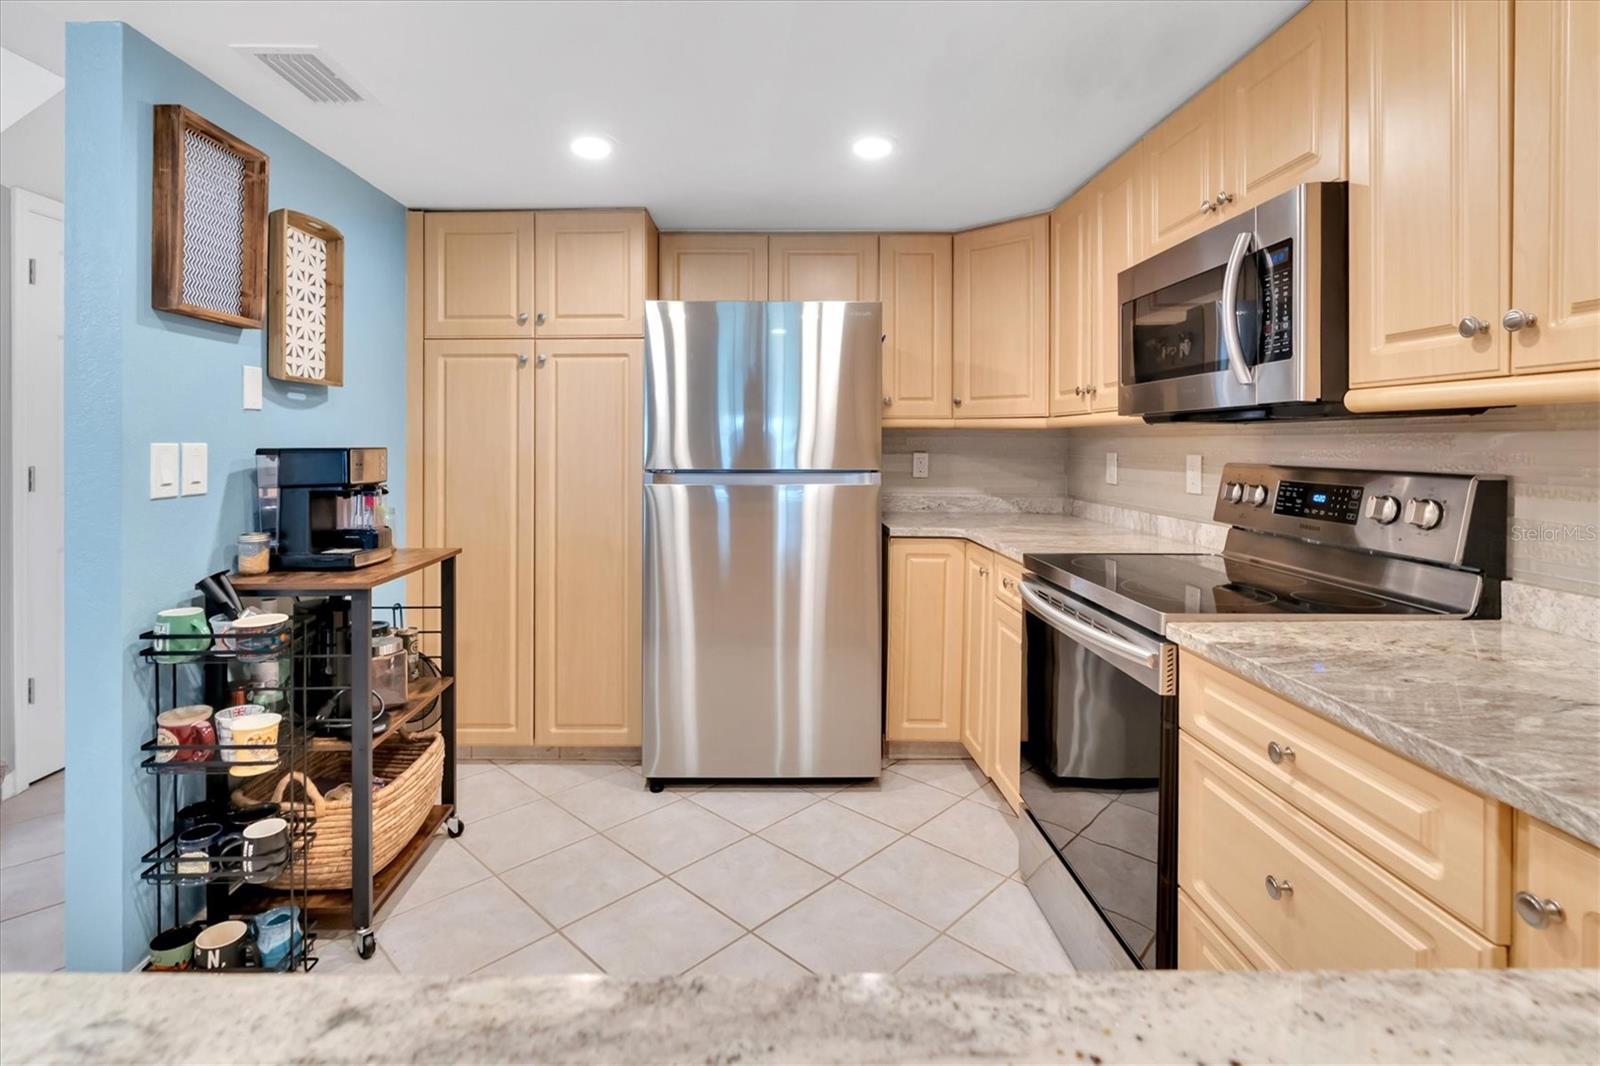 Nice size kitchen with granite counters and stainless steel appliances featuring a pantry!